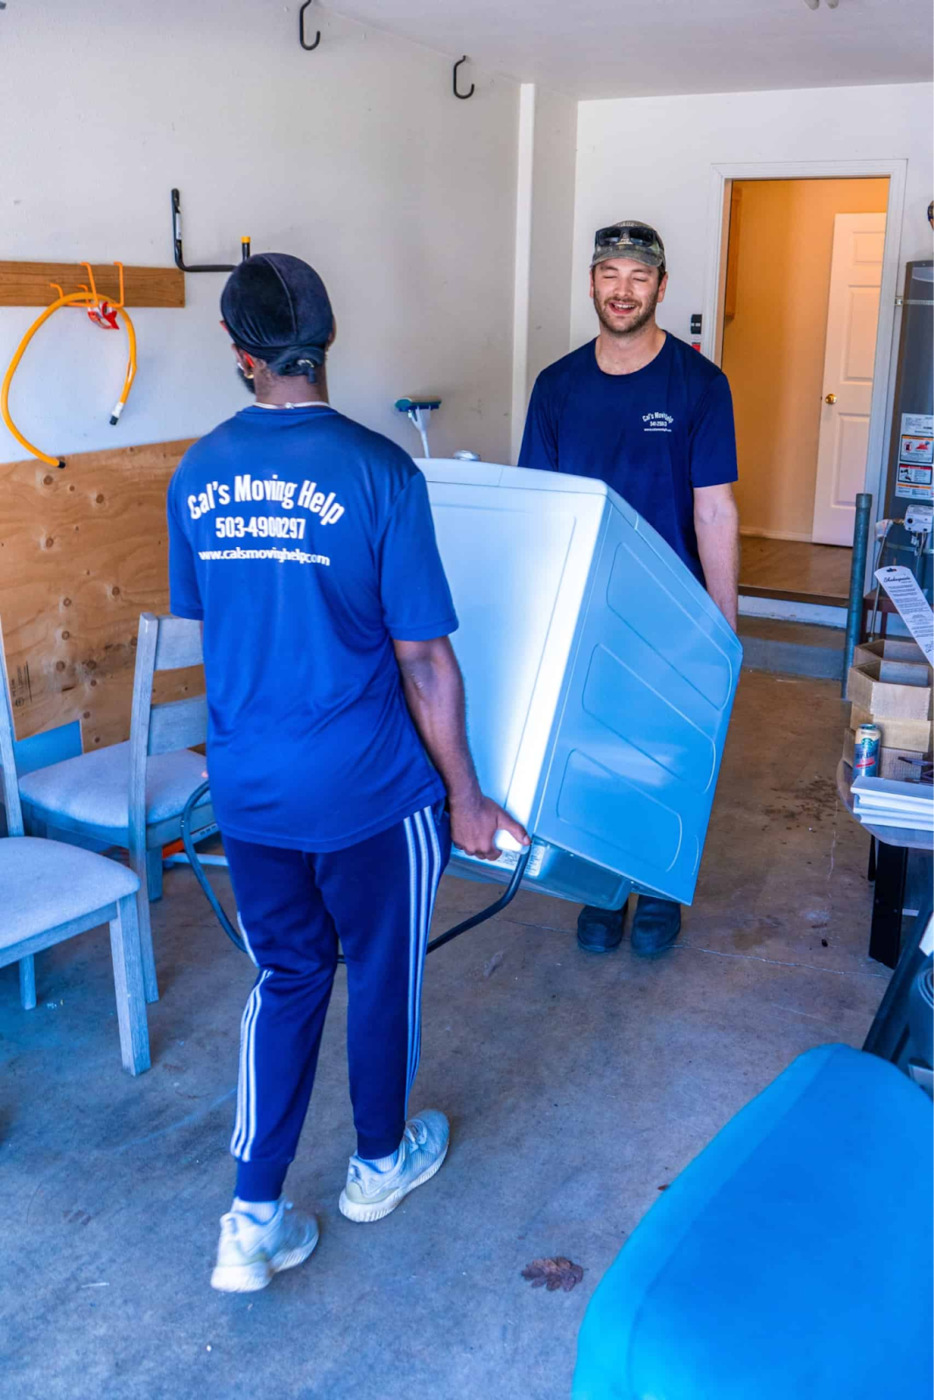 Cal's Moving & Storage is a top-rated moving company in Portland, OR, known for its seamless and efficient moving services.